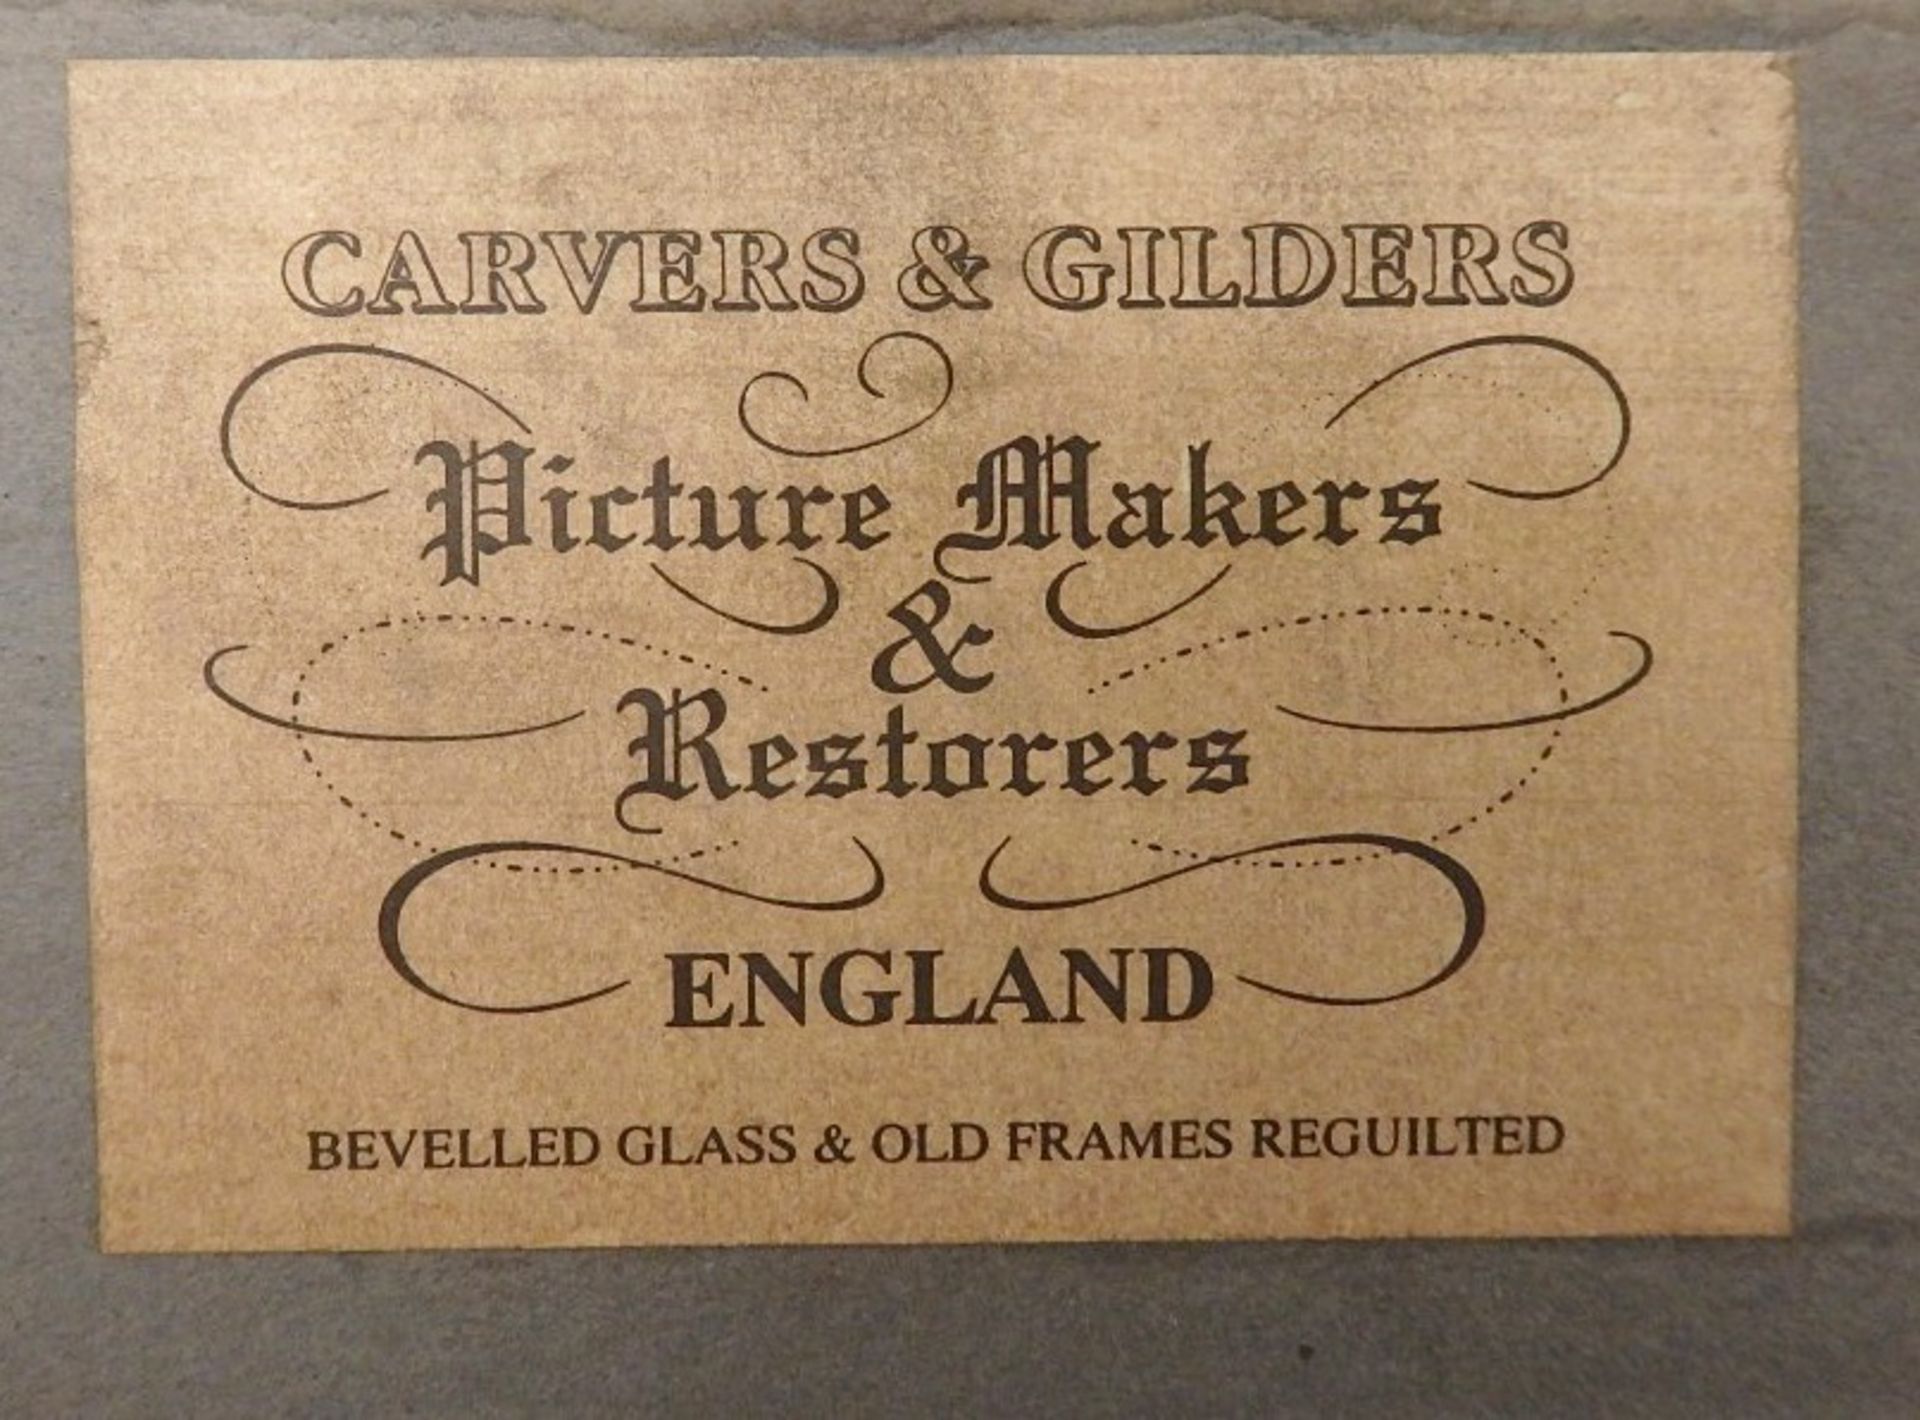 1 x Frame Art Print In An Ornate Gilt Frame - Carvers and Gilders of England - Size: 12" x 16" x - Image 7 of 8